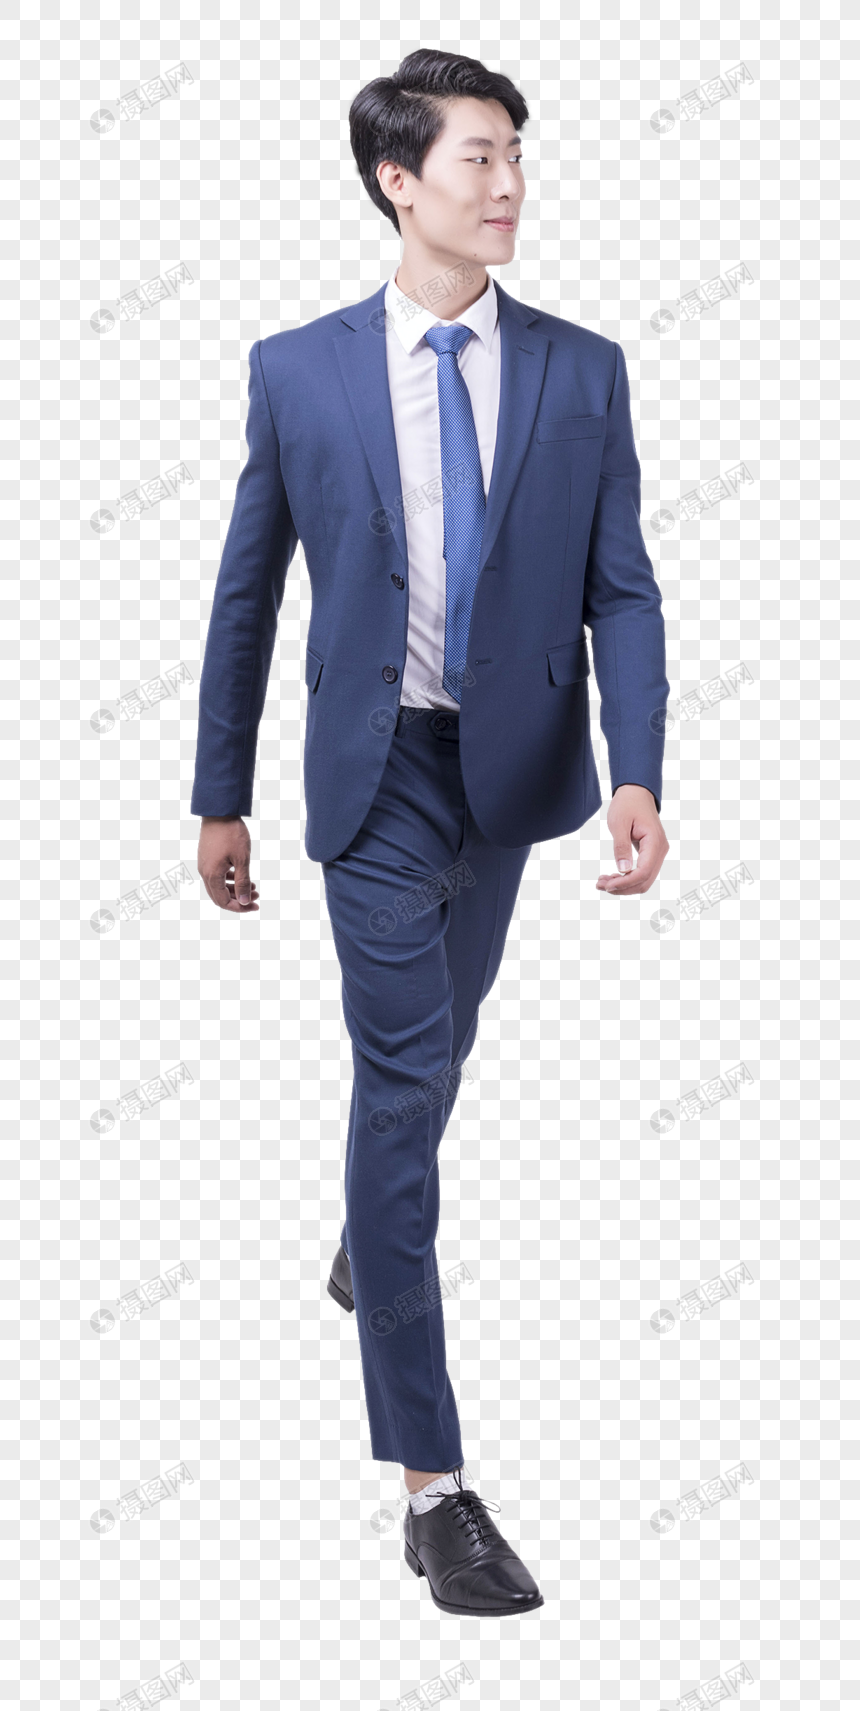 Business Personage Walking, Skinny Pant, Material, Business People PNG ...